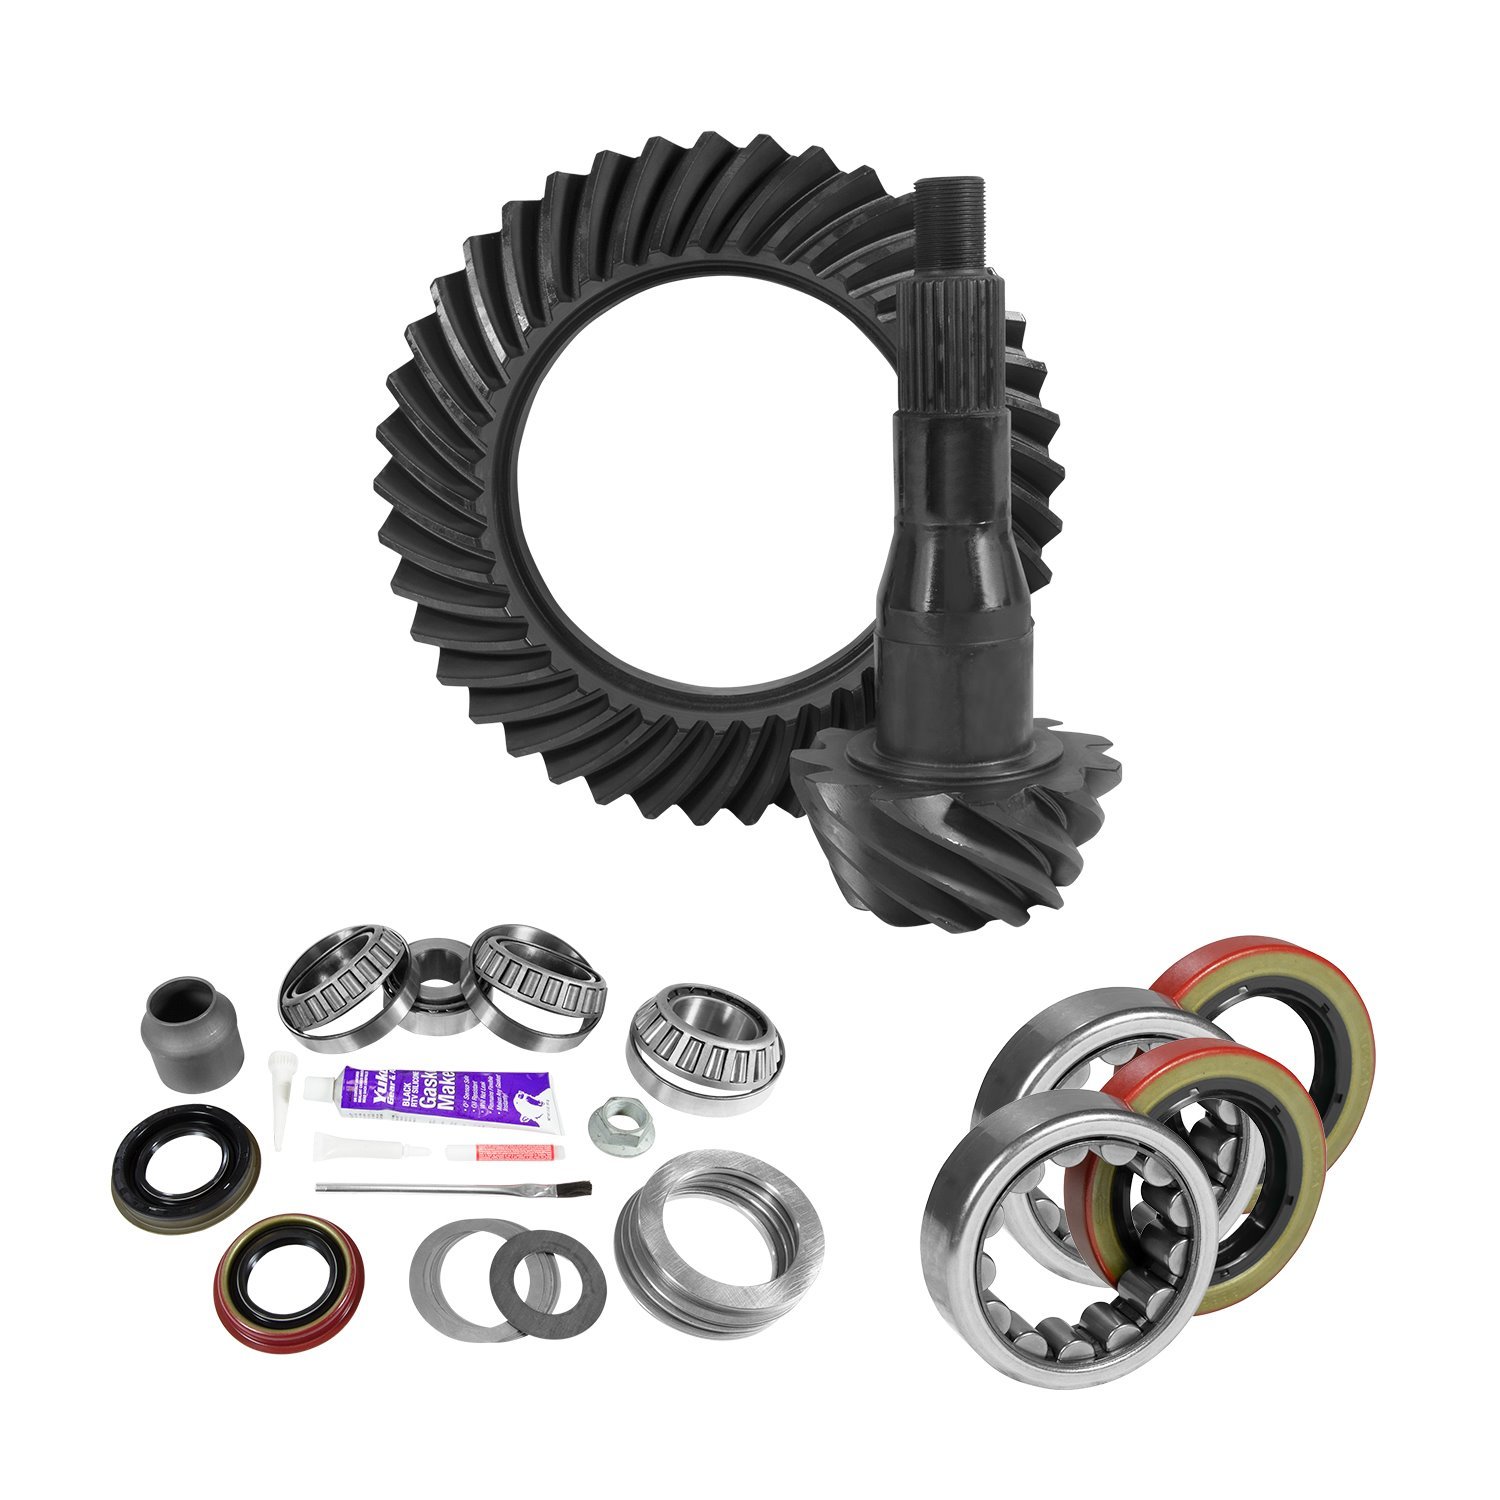 USA Standard 10800 9.75 in. Ford 3.73 Rear Ring & Pinion Install Kit, 2.53 in. Od Axle Bearings & Seal